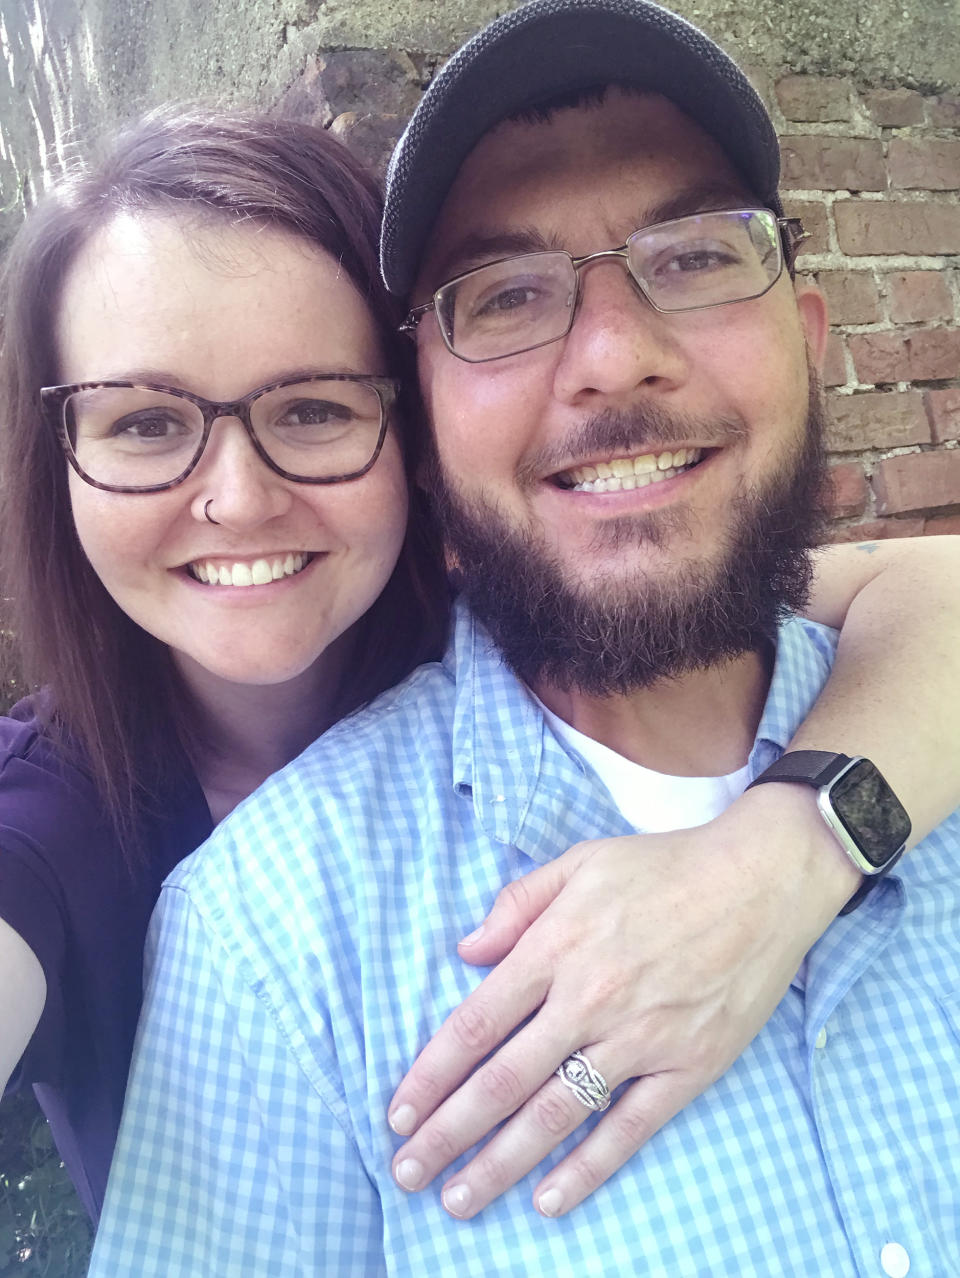 Jessica Davis never thought she'd get married until she reconnected with a former classmate, Robbie Davis. He never asked her about her limp or painful health history and she liked how he focused on the now.  (Courtesy Jessica Davis)